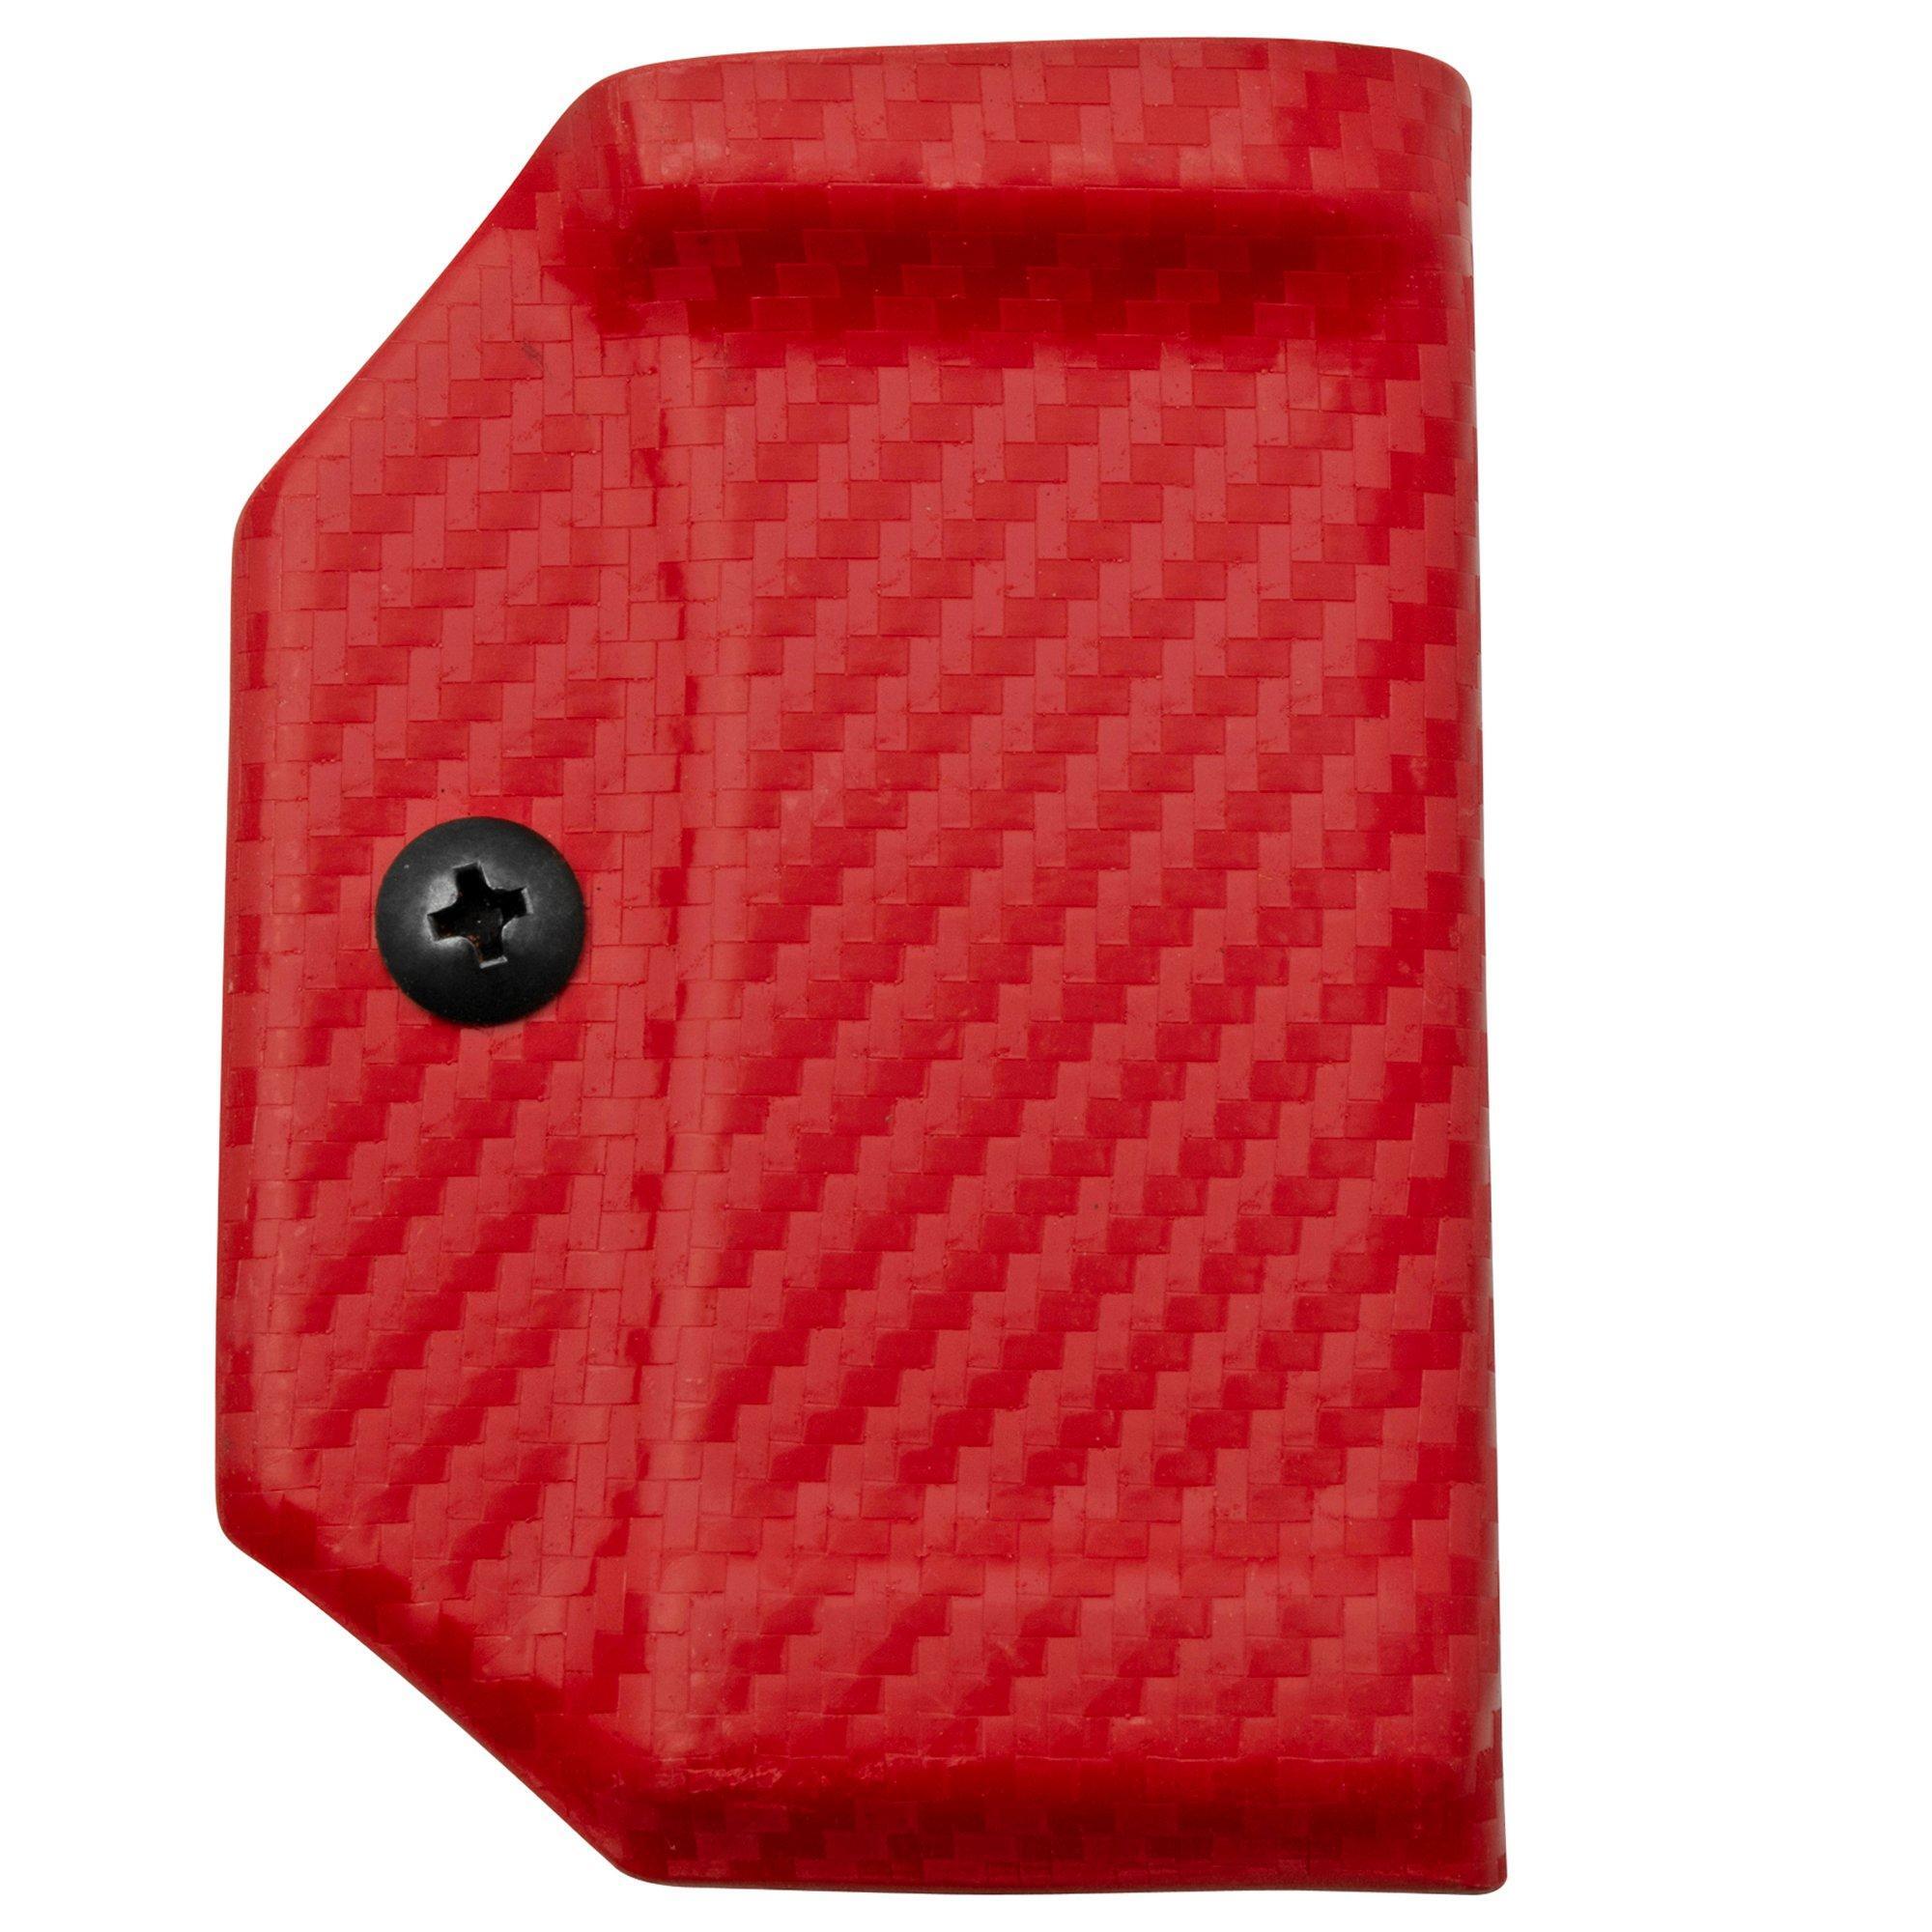 Clip & Carry Clip And Carry Kydex Sheath Victorinox Spirit, Carbon Fiber Red VSPIRIT-CF-RED riemholster